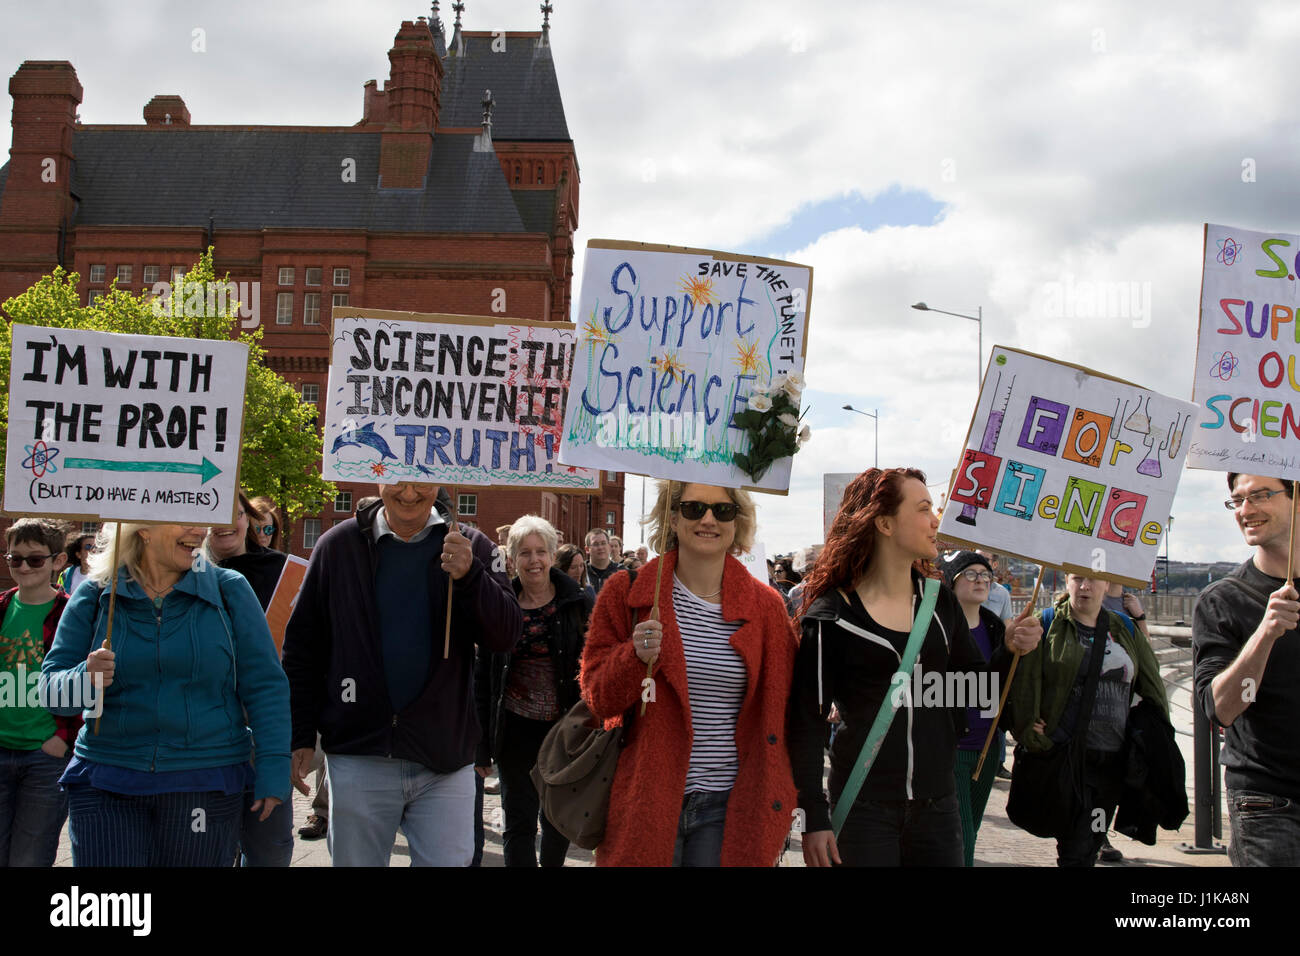 Cardiff, Wales, UK. 22nd Apr, 2017. Scientists and members of the public rally outside the Senedd at Cardiff Bay in support of the global March for Science to show support for science funding and evidence based policy. Credit: Craig Redmond/Alamy Live News Stock Photo